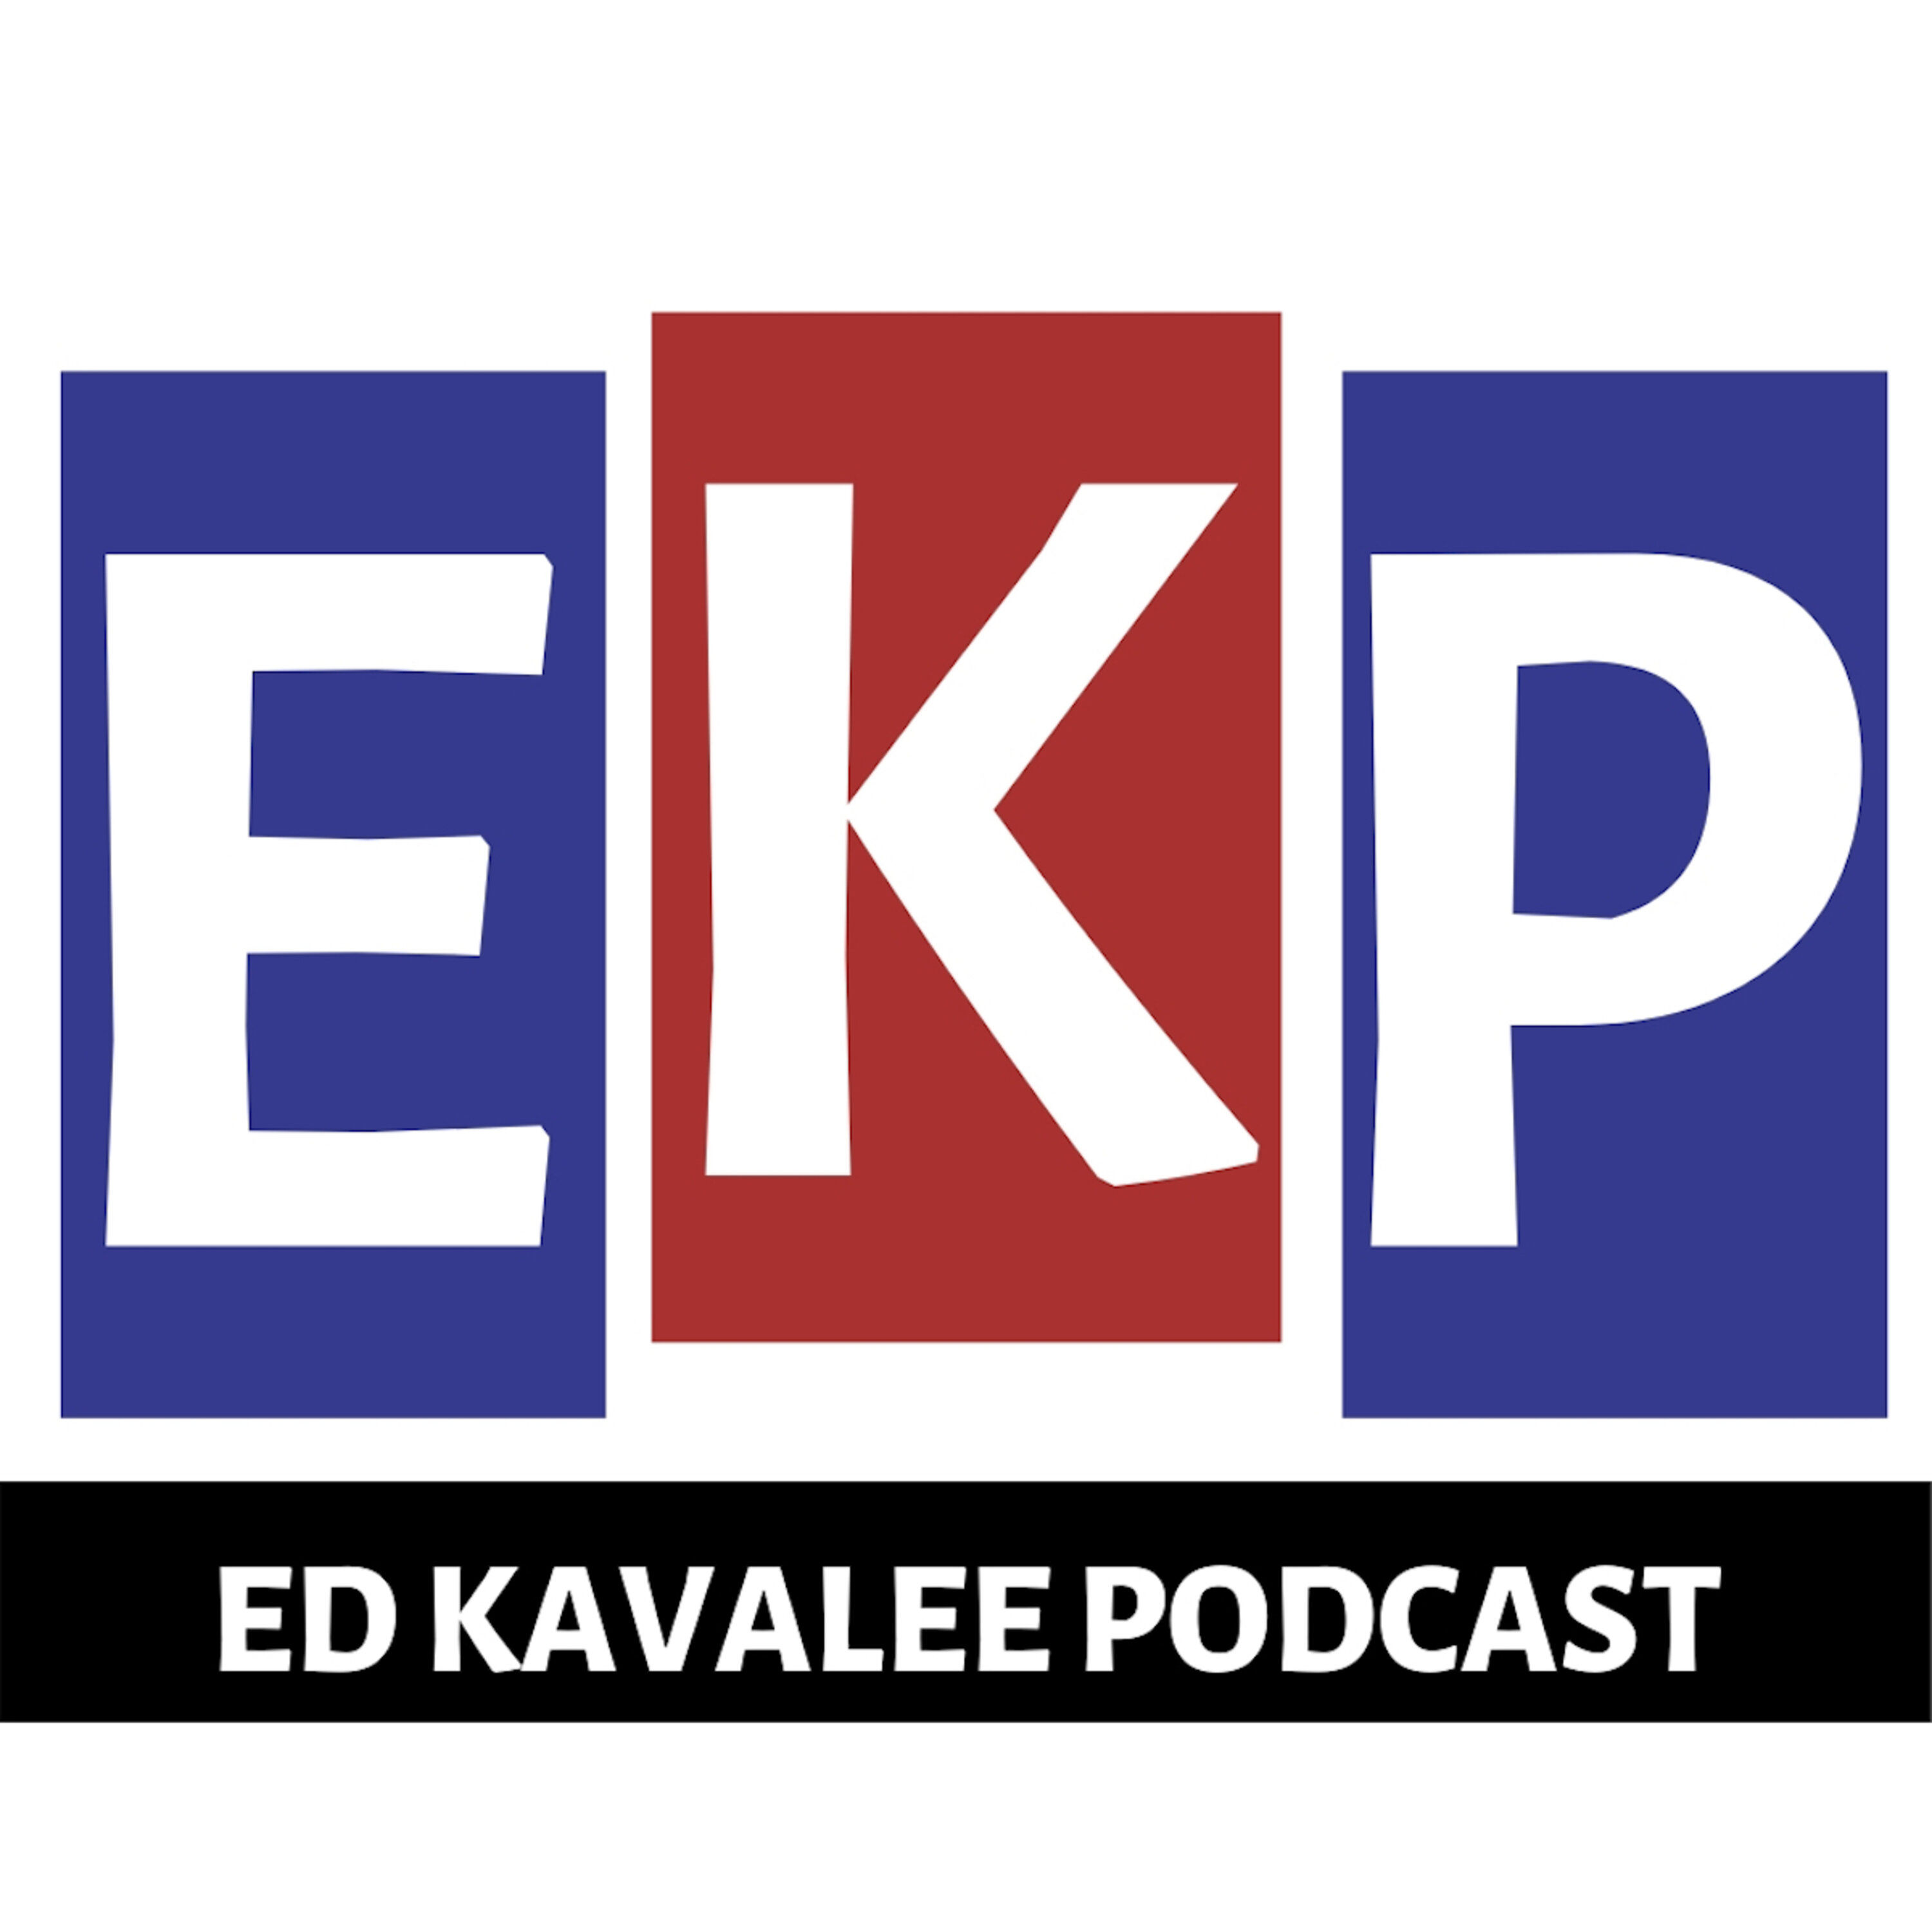 EKP: The Debut of ’Would they do that today?’ with Tony Martin